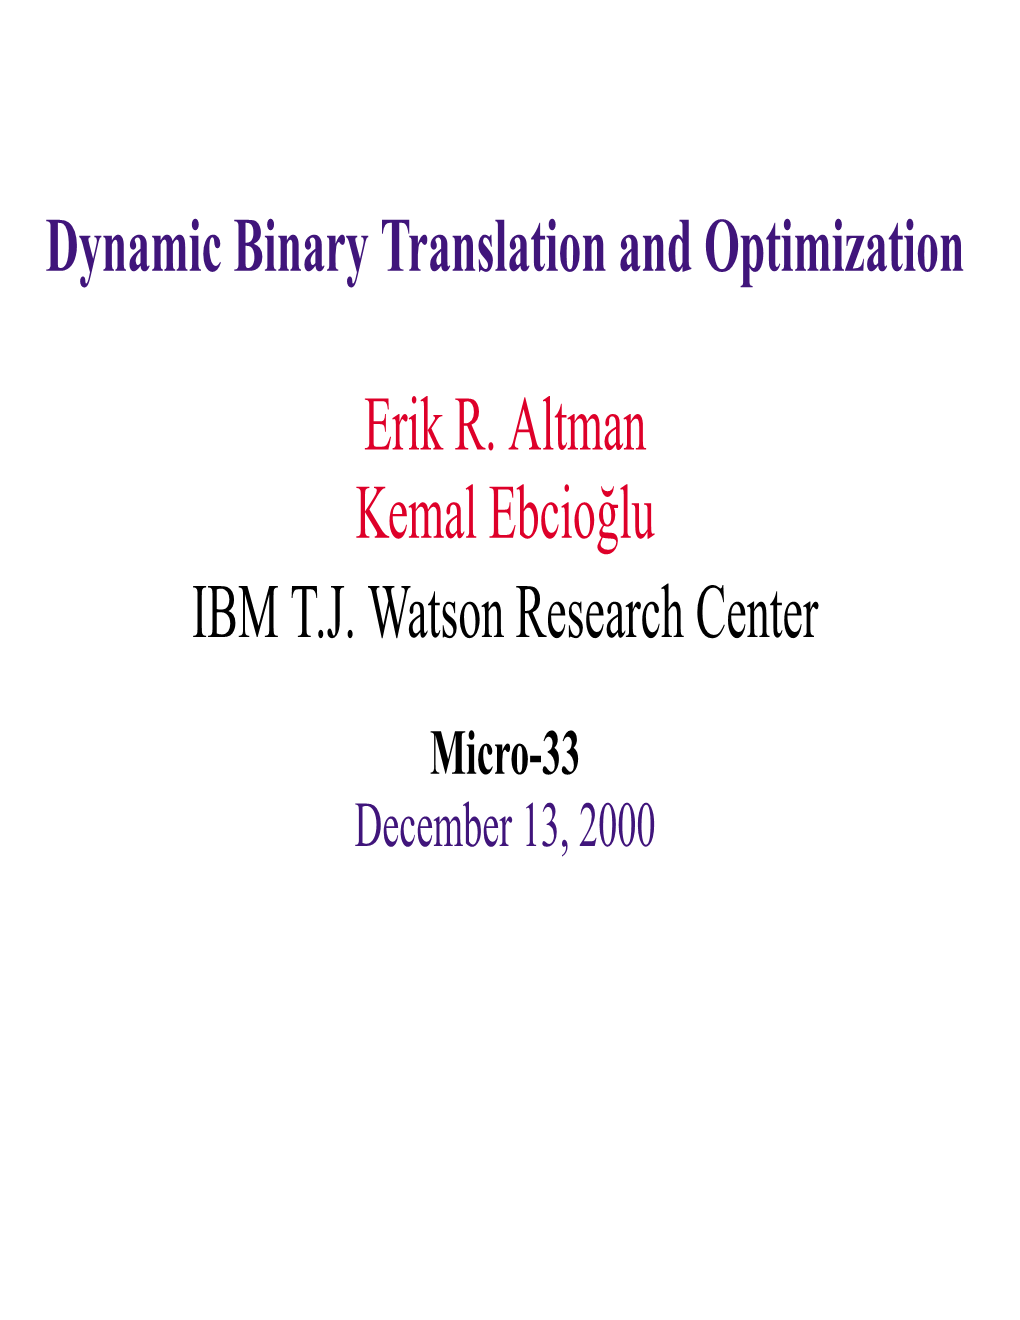 Issues in Binary Translation